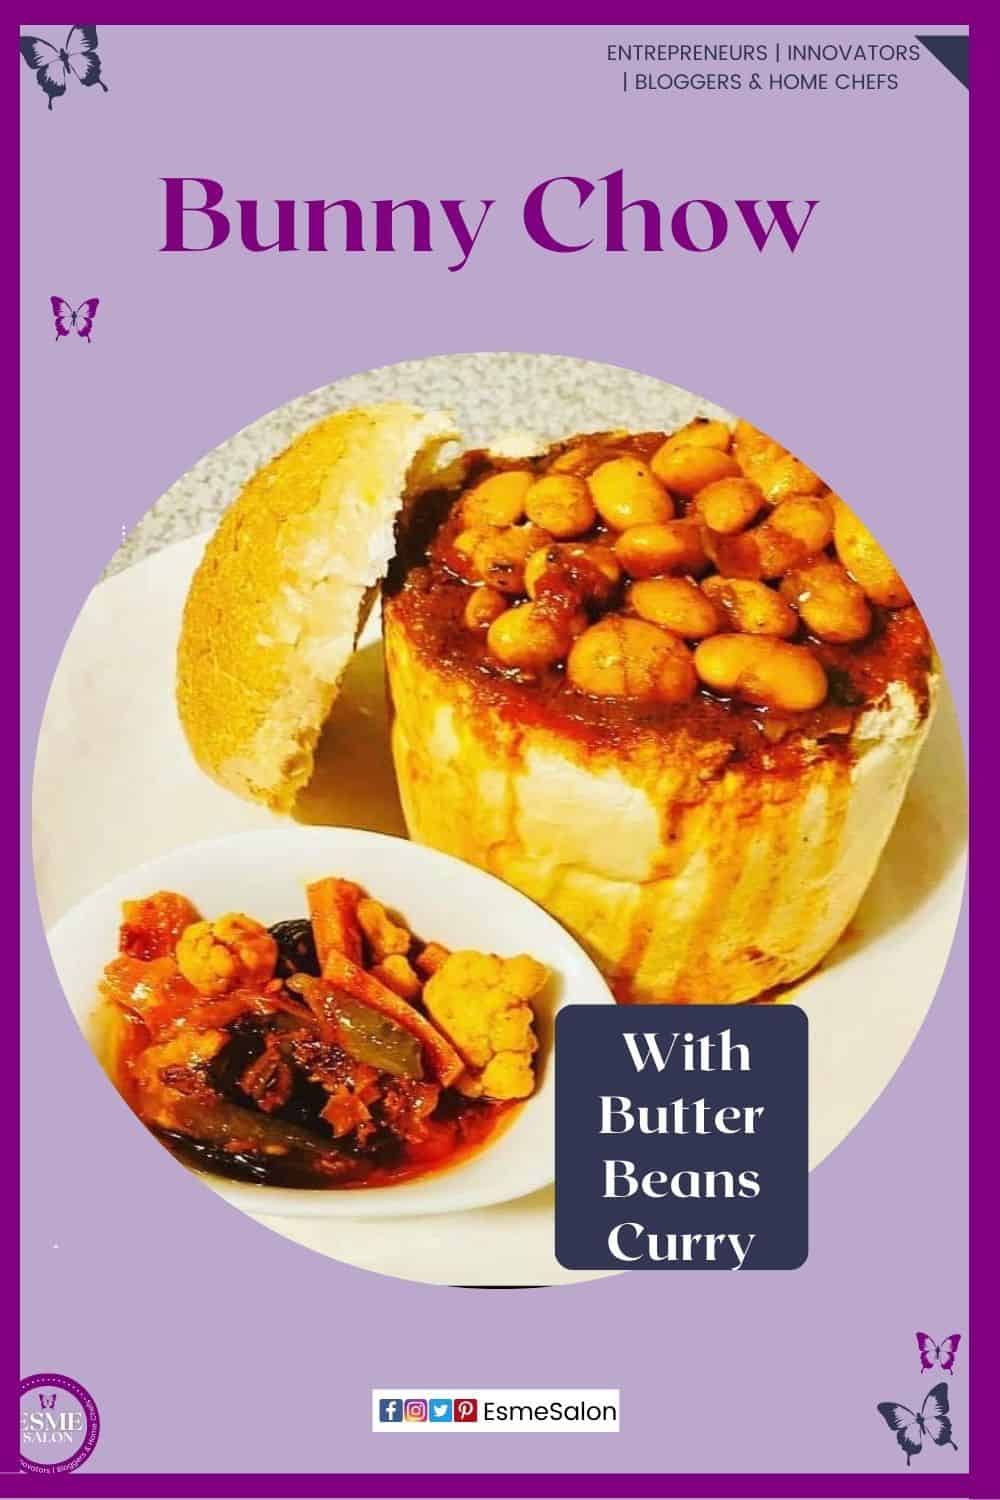 a image of a loaf of bread with top cut off and filled with Butter Beans Curry